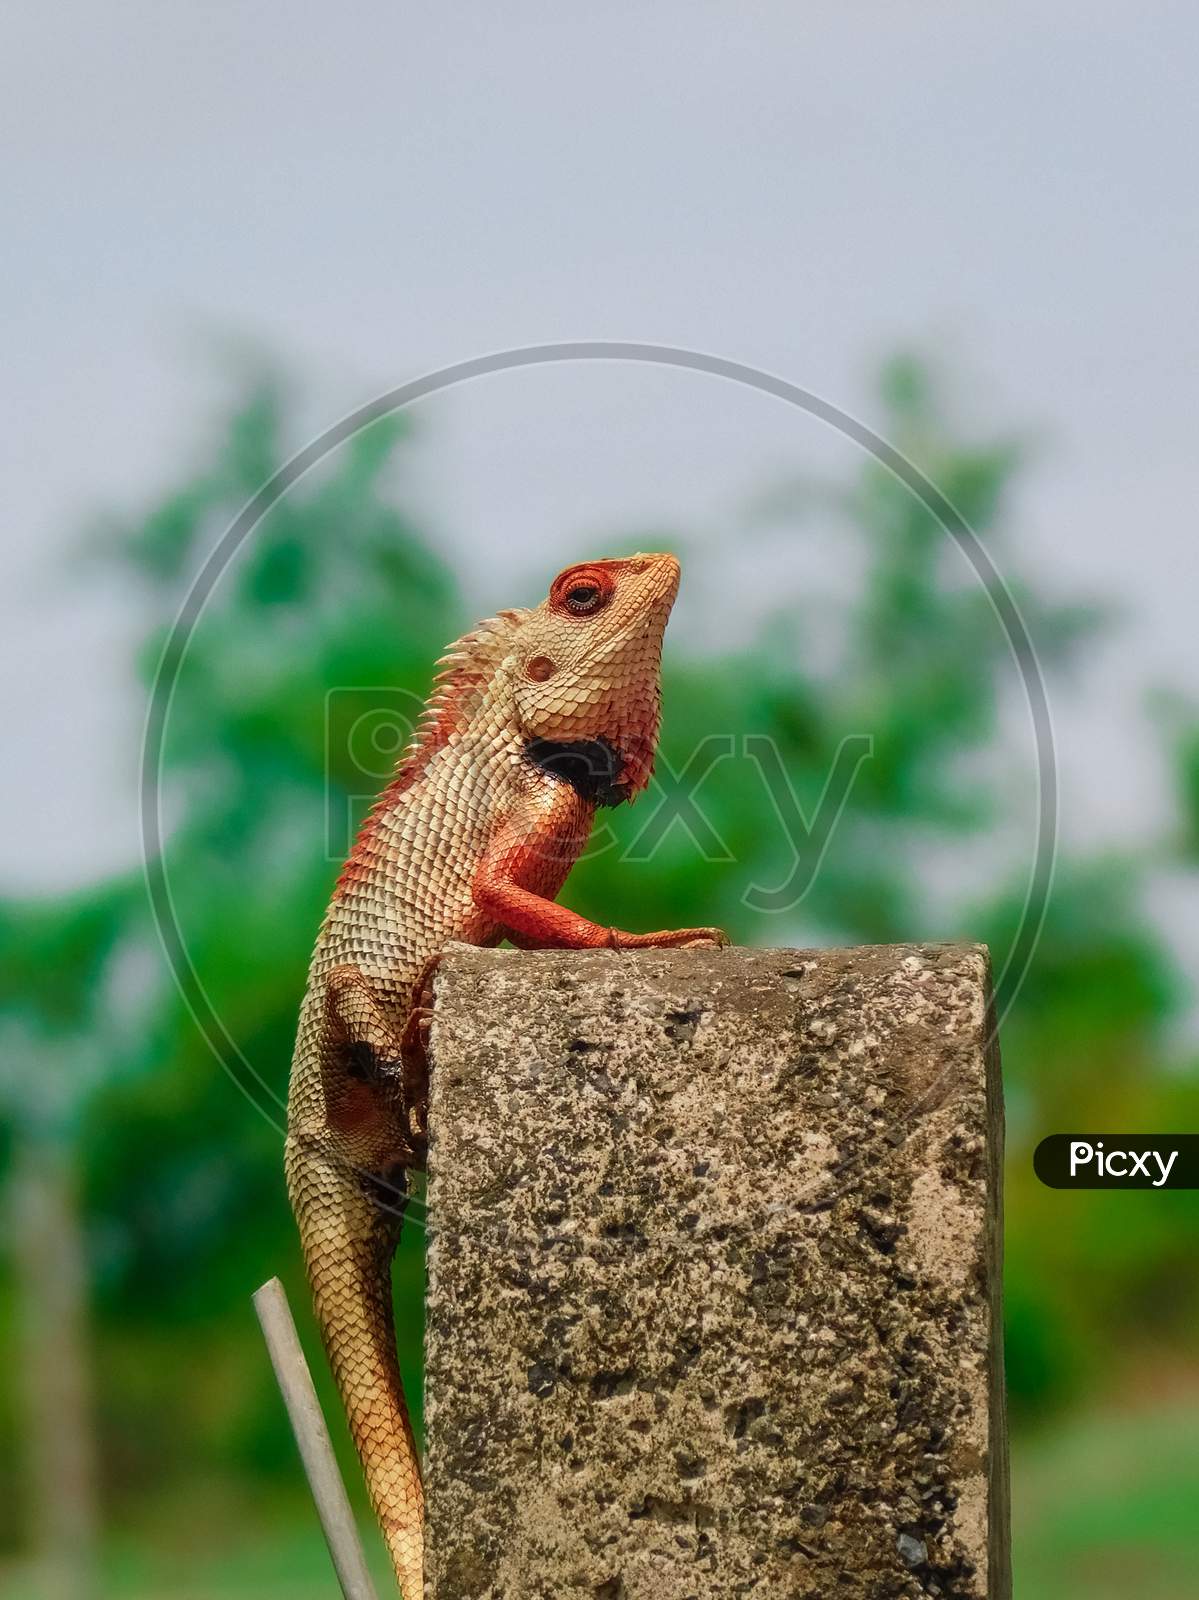 Oriental garden lizard or Changeable lizard (Calotes versicolor) lazy lying on grunge cement pole with green nature blurred background.